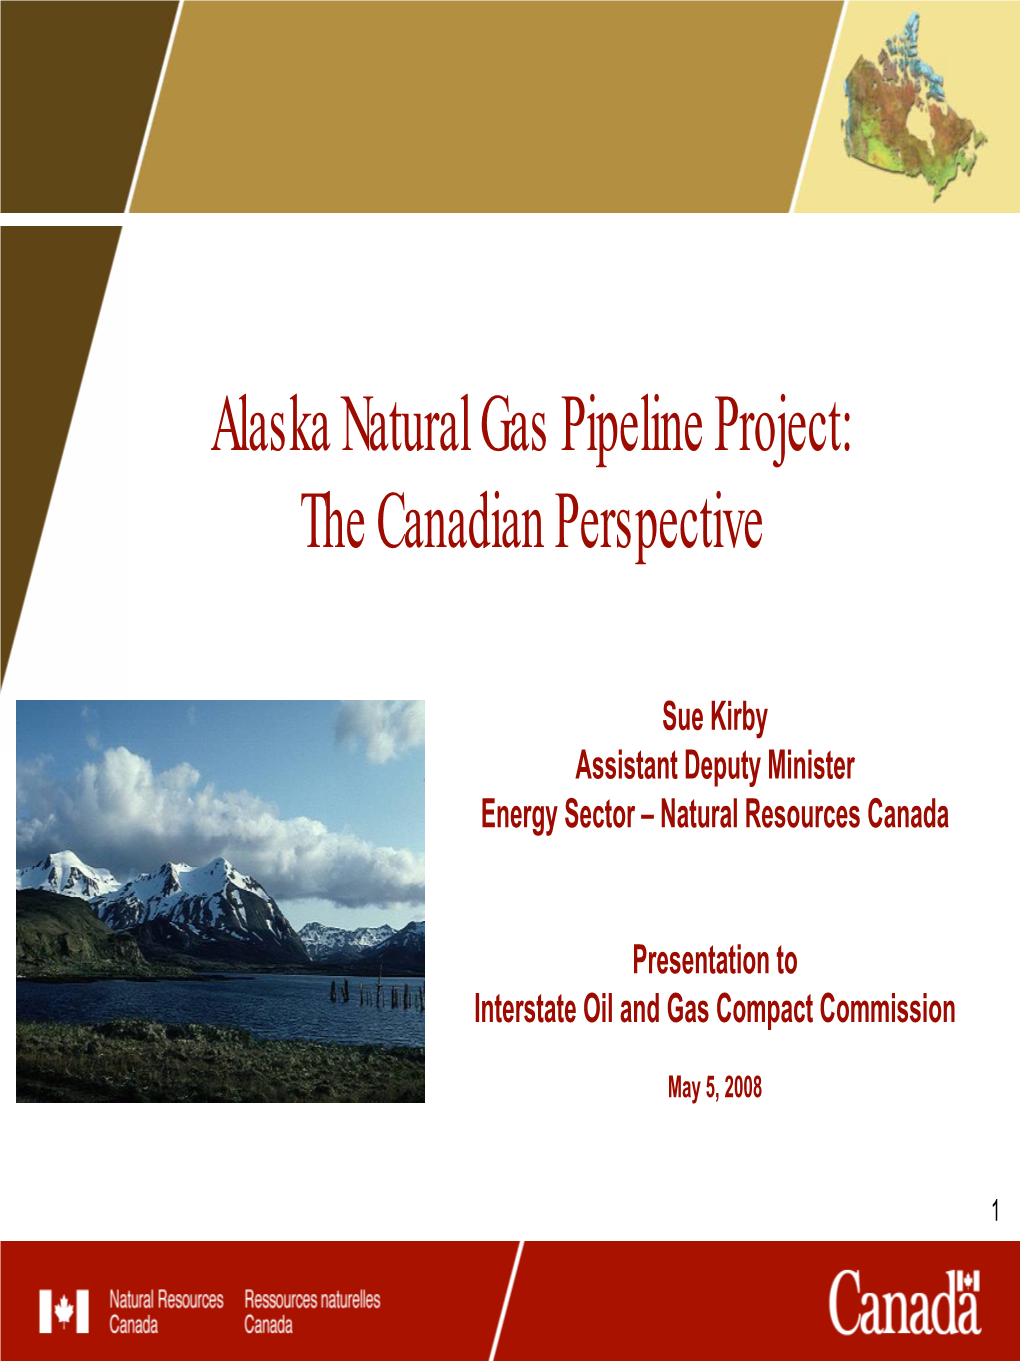 Alaska Natural Gas Pipeline Project: the Canadian Perspective